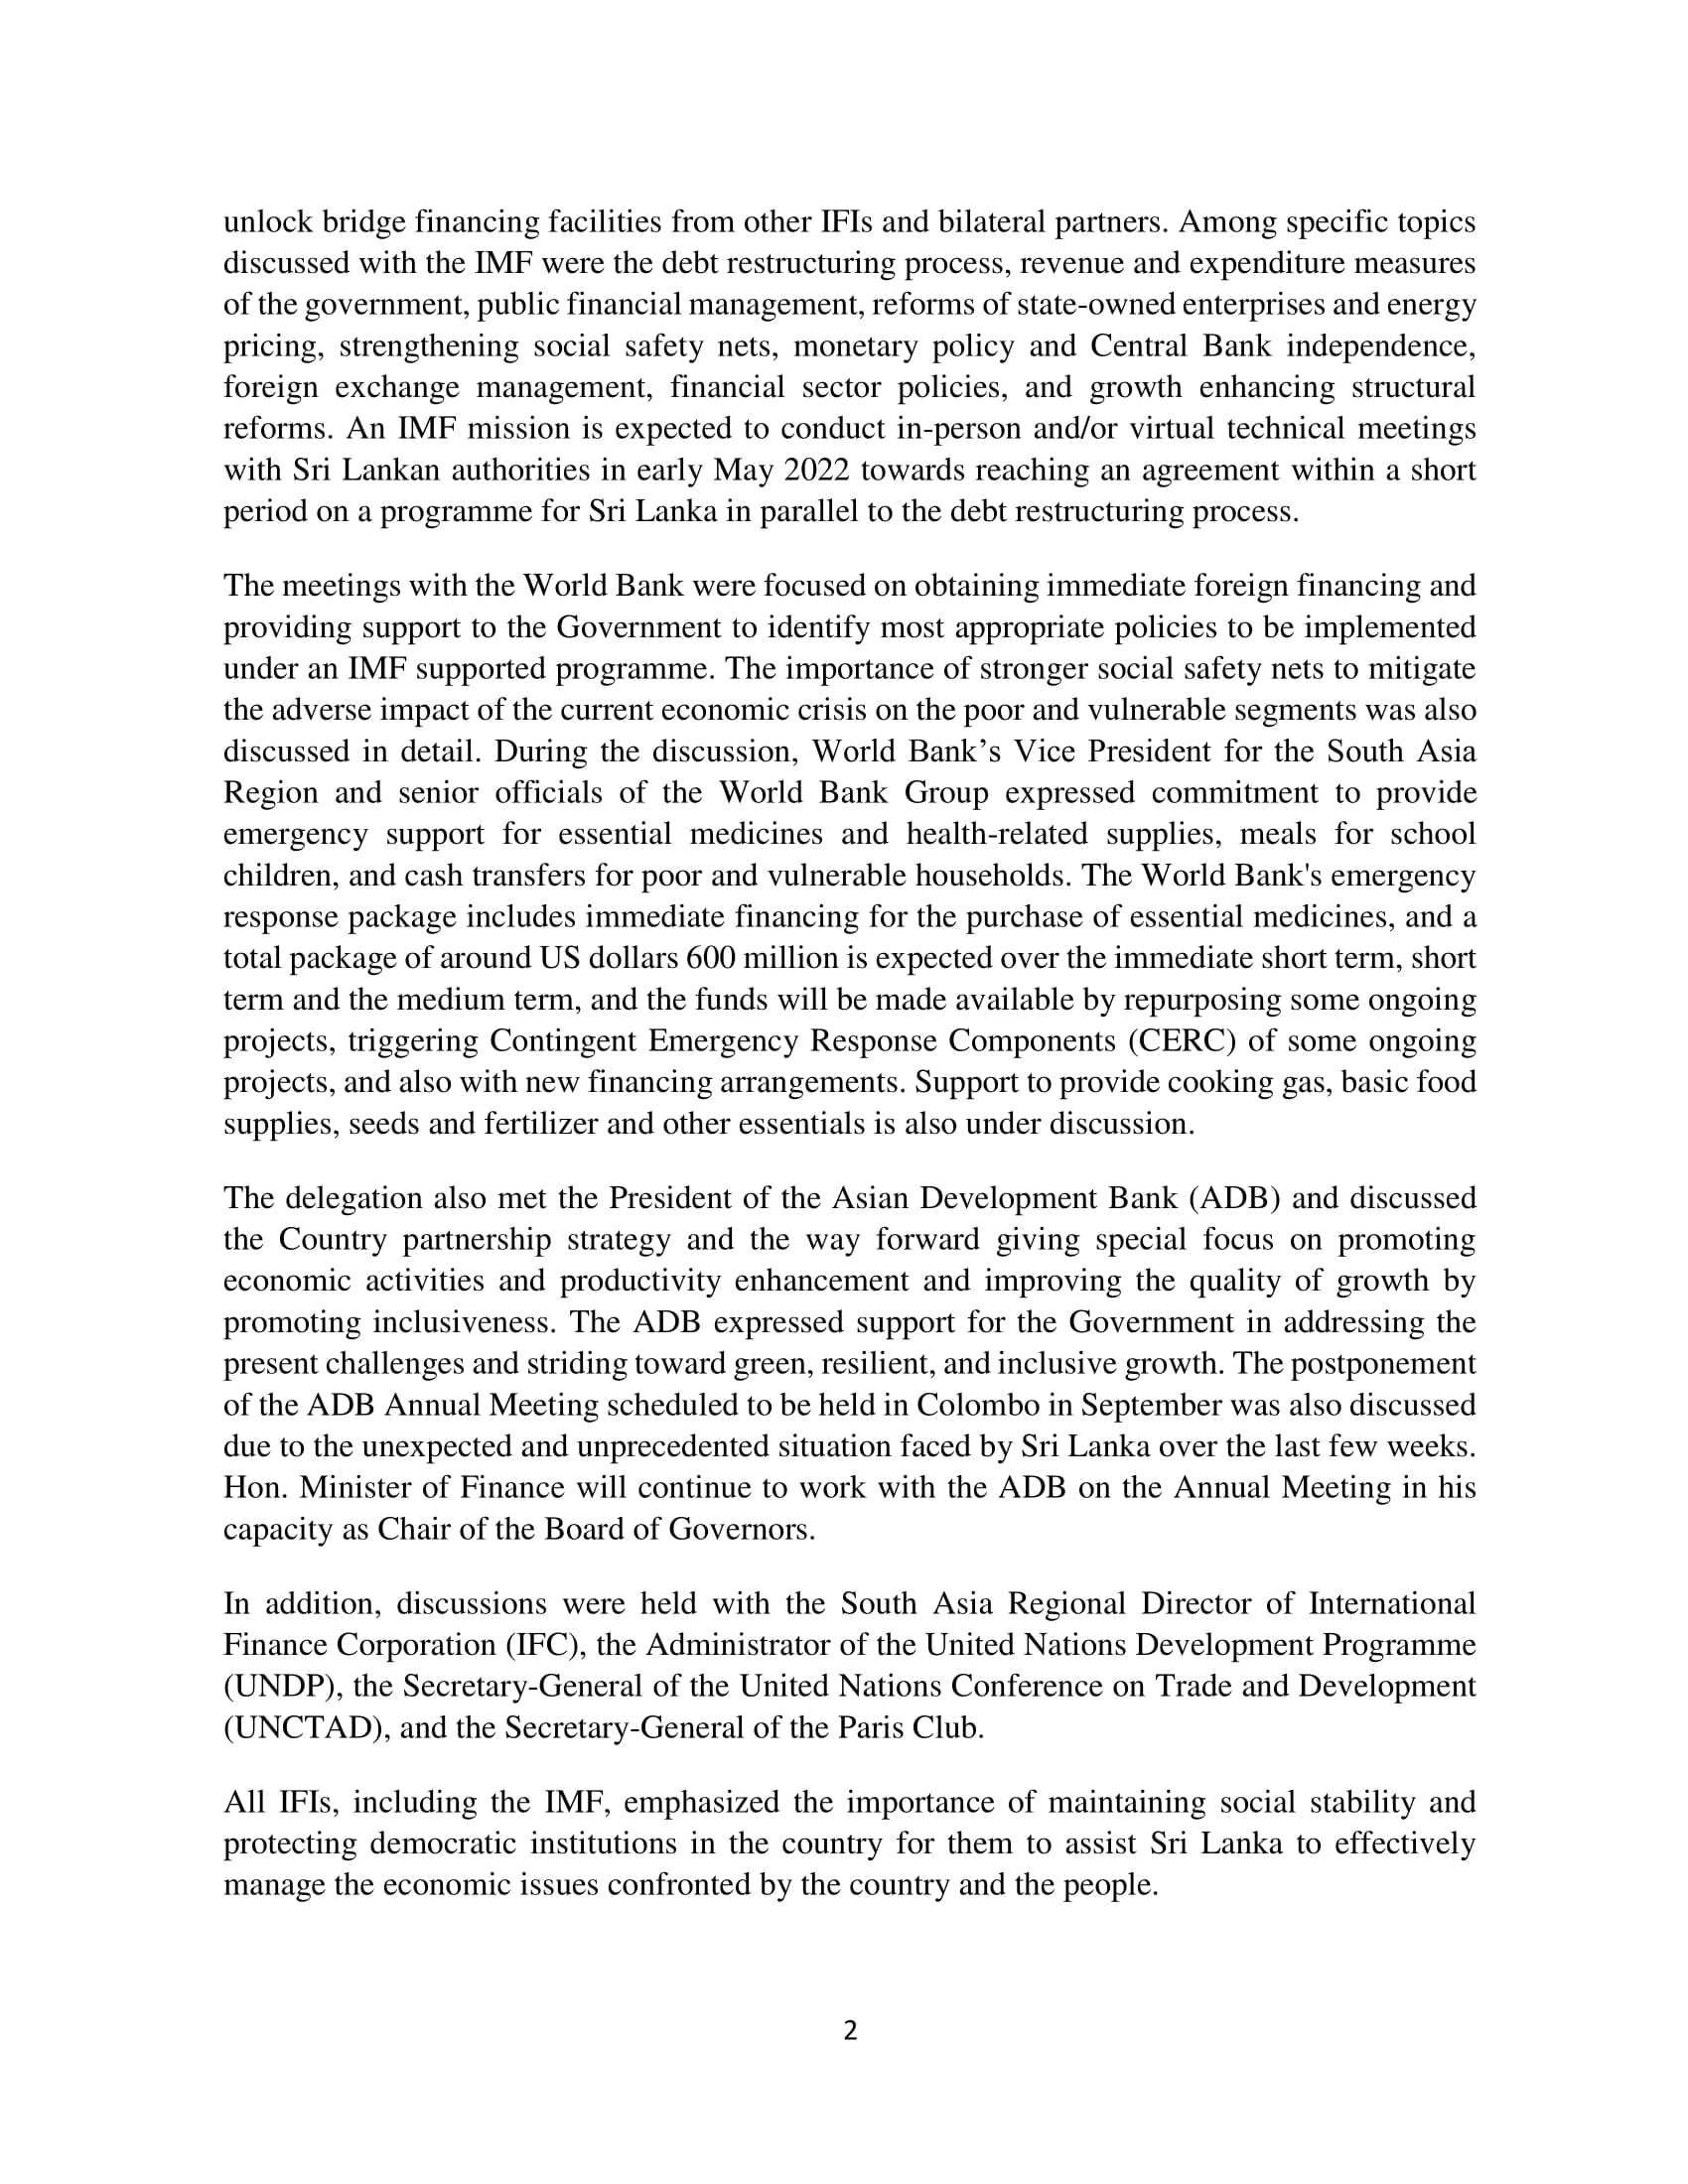 2022 04 30 Press Release on IMF Discussion with Giovernors comments Final 2